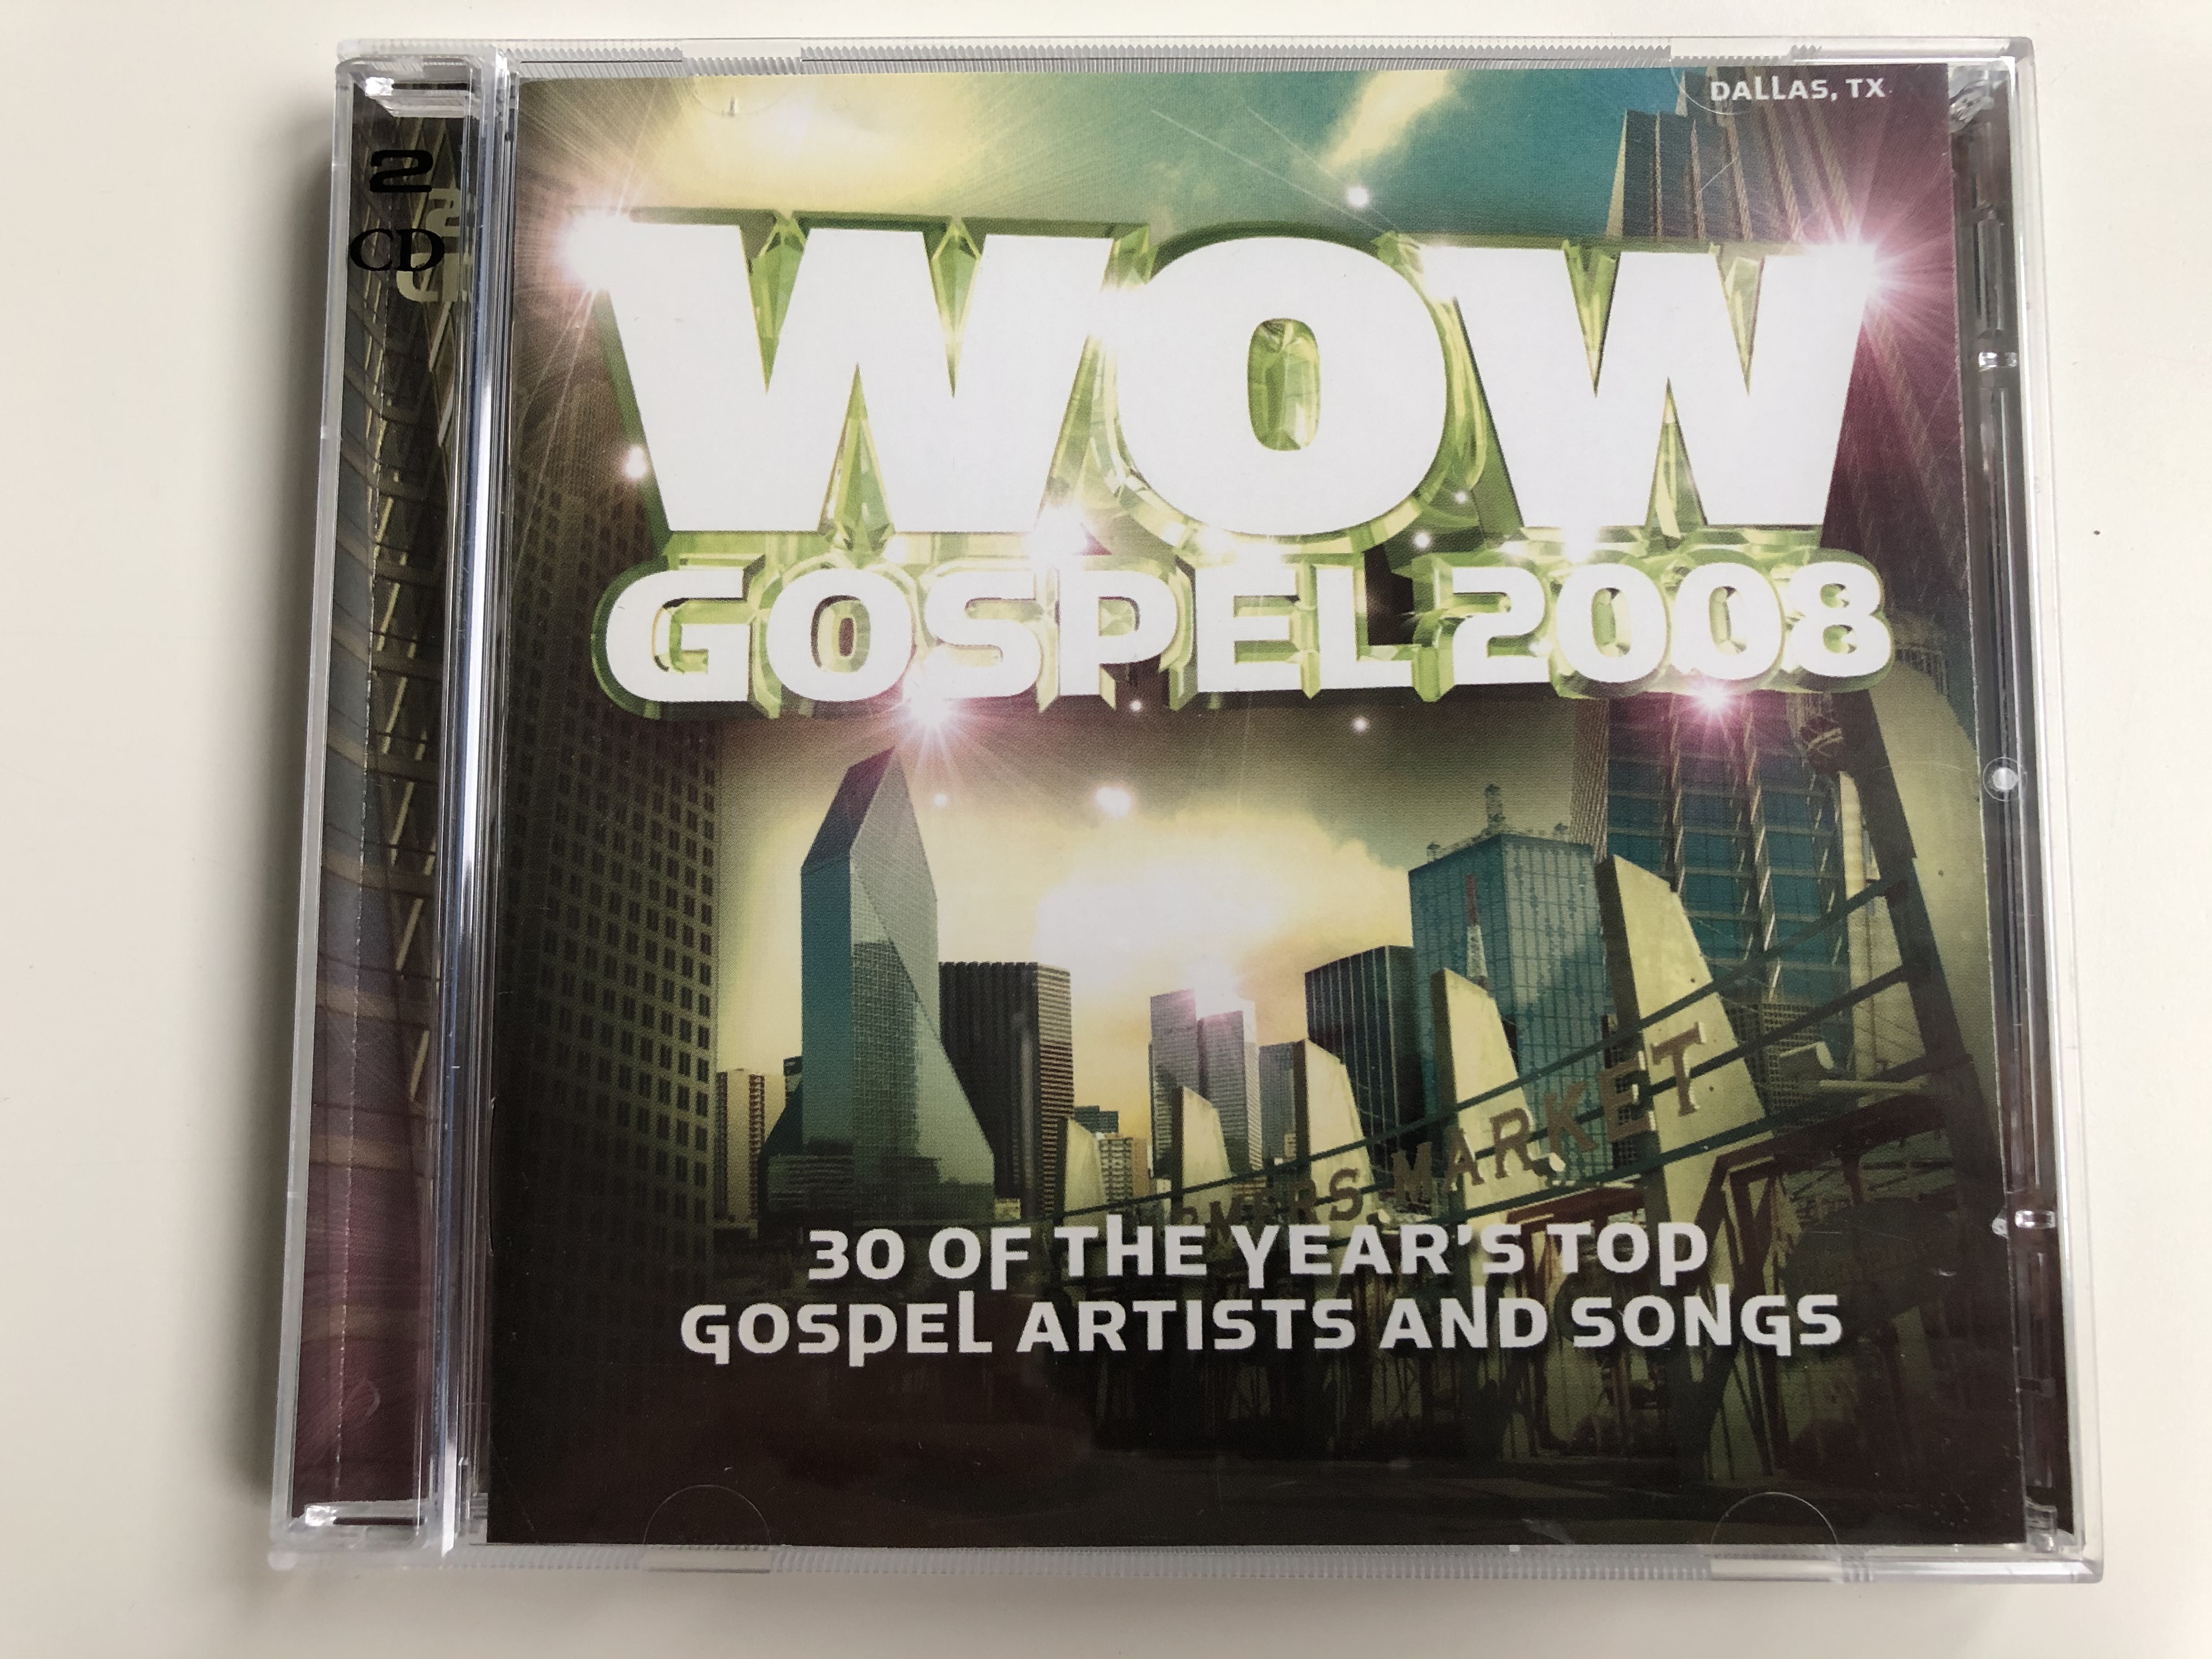 wow-gospel-2008-30-of-the-year-s-top-gospel-artists-and-songs-zomba-label-group-2x-audio-cd-2008-88697-19290-2-1-.jpg